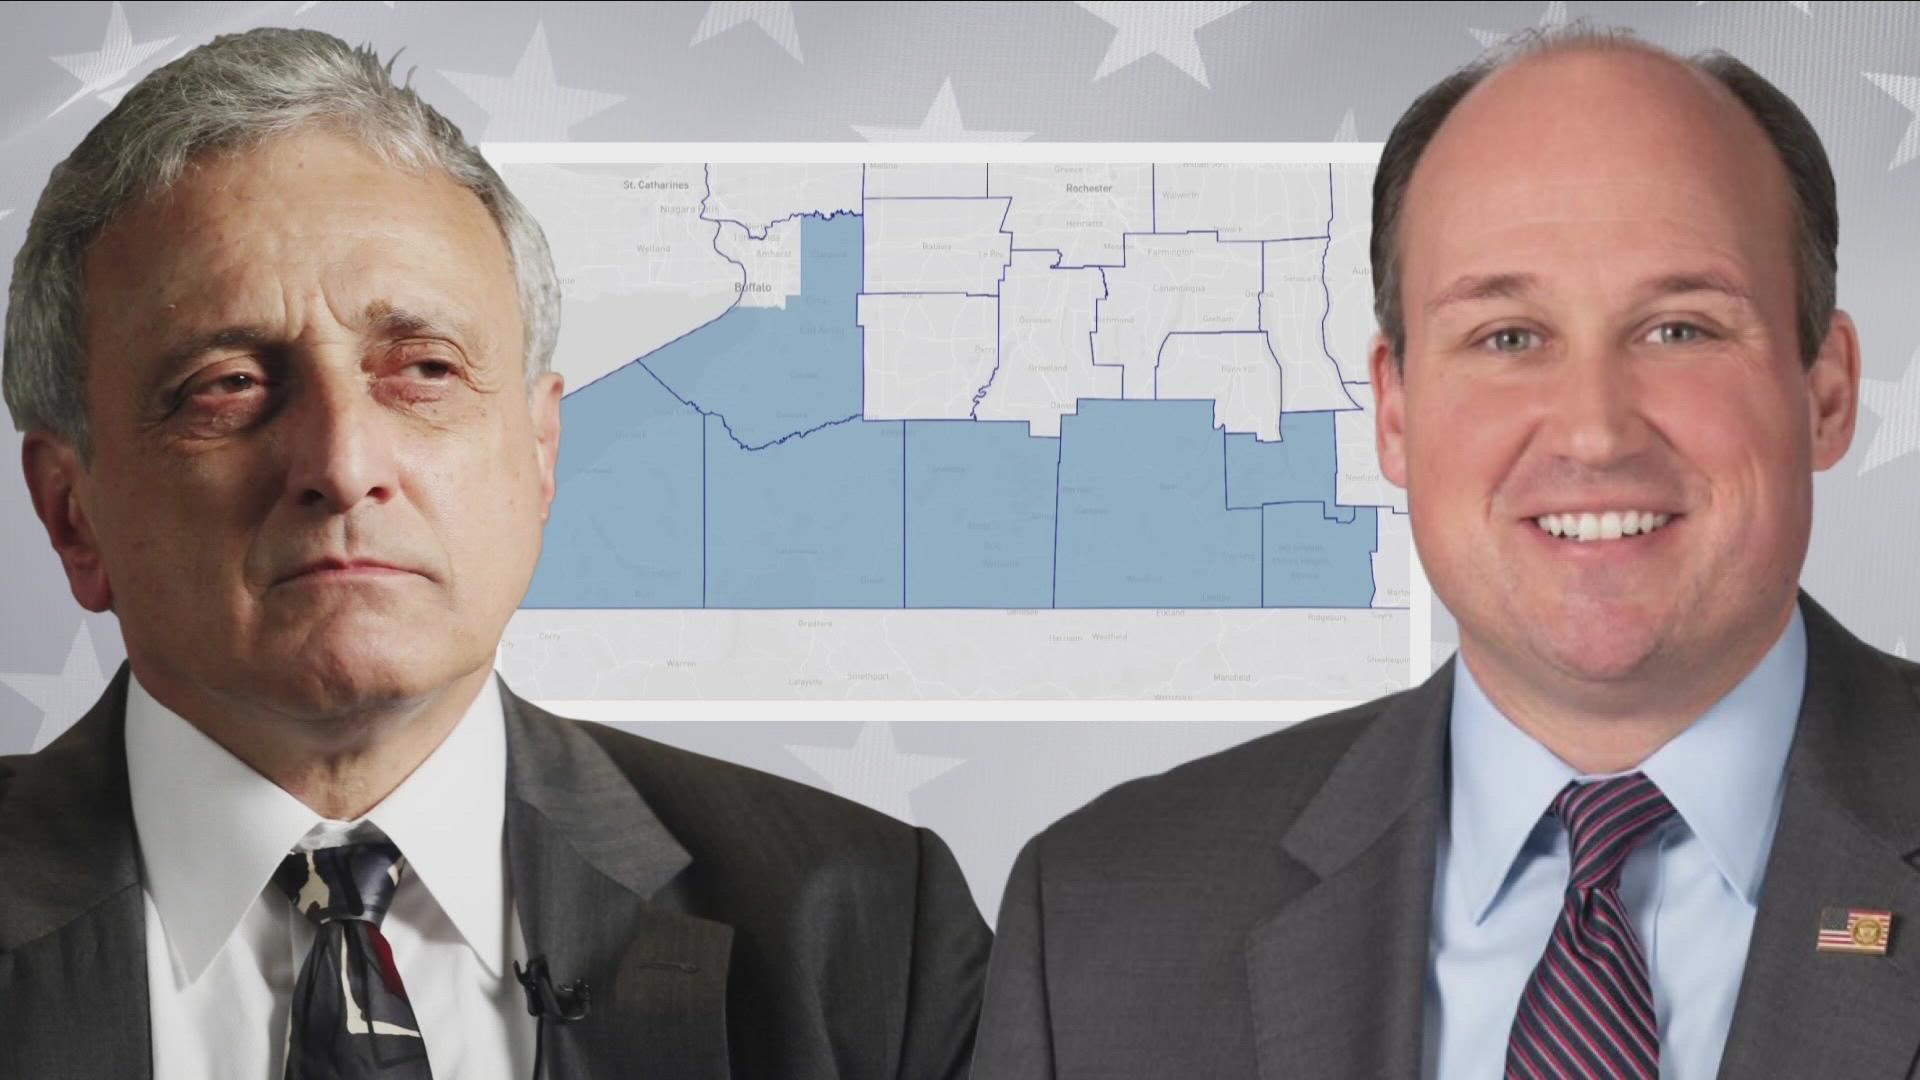 THE G-O-P RACE IS BETWEEN CARL PALADINO AND NEW YORK state REPUBLICAN PARTY CHAIR NICK LANGWORTHY.